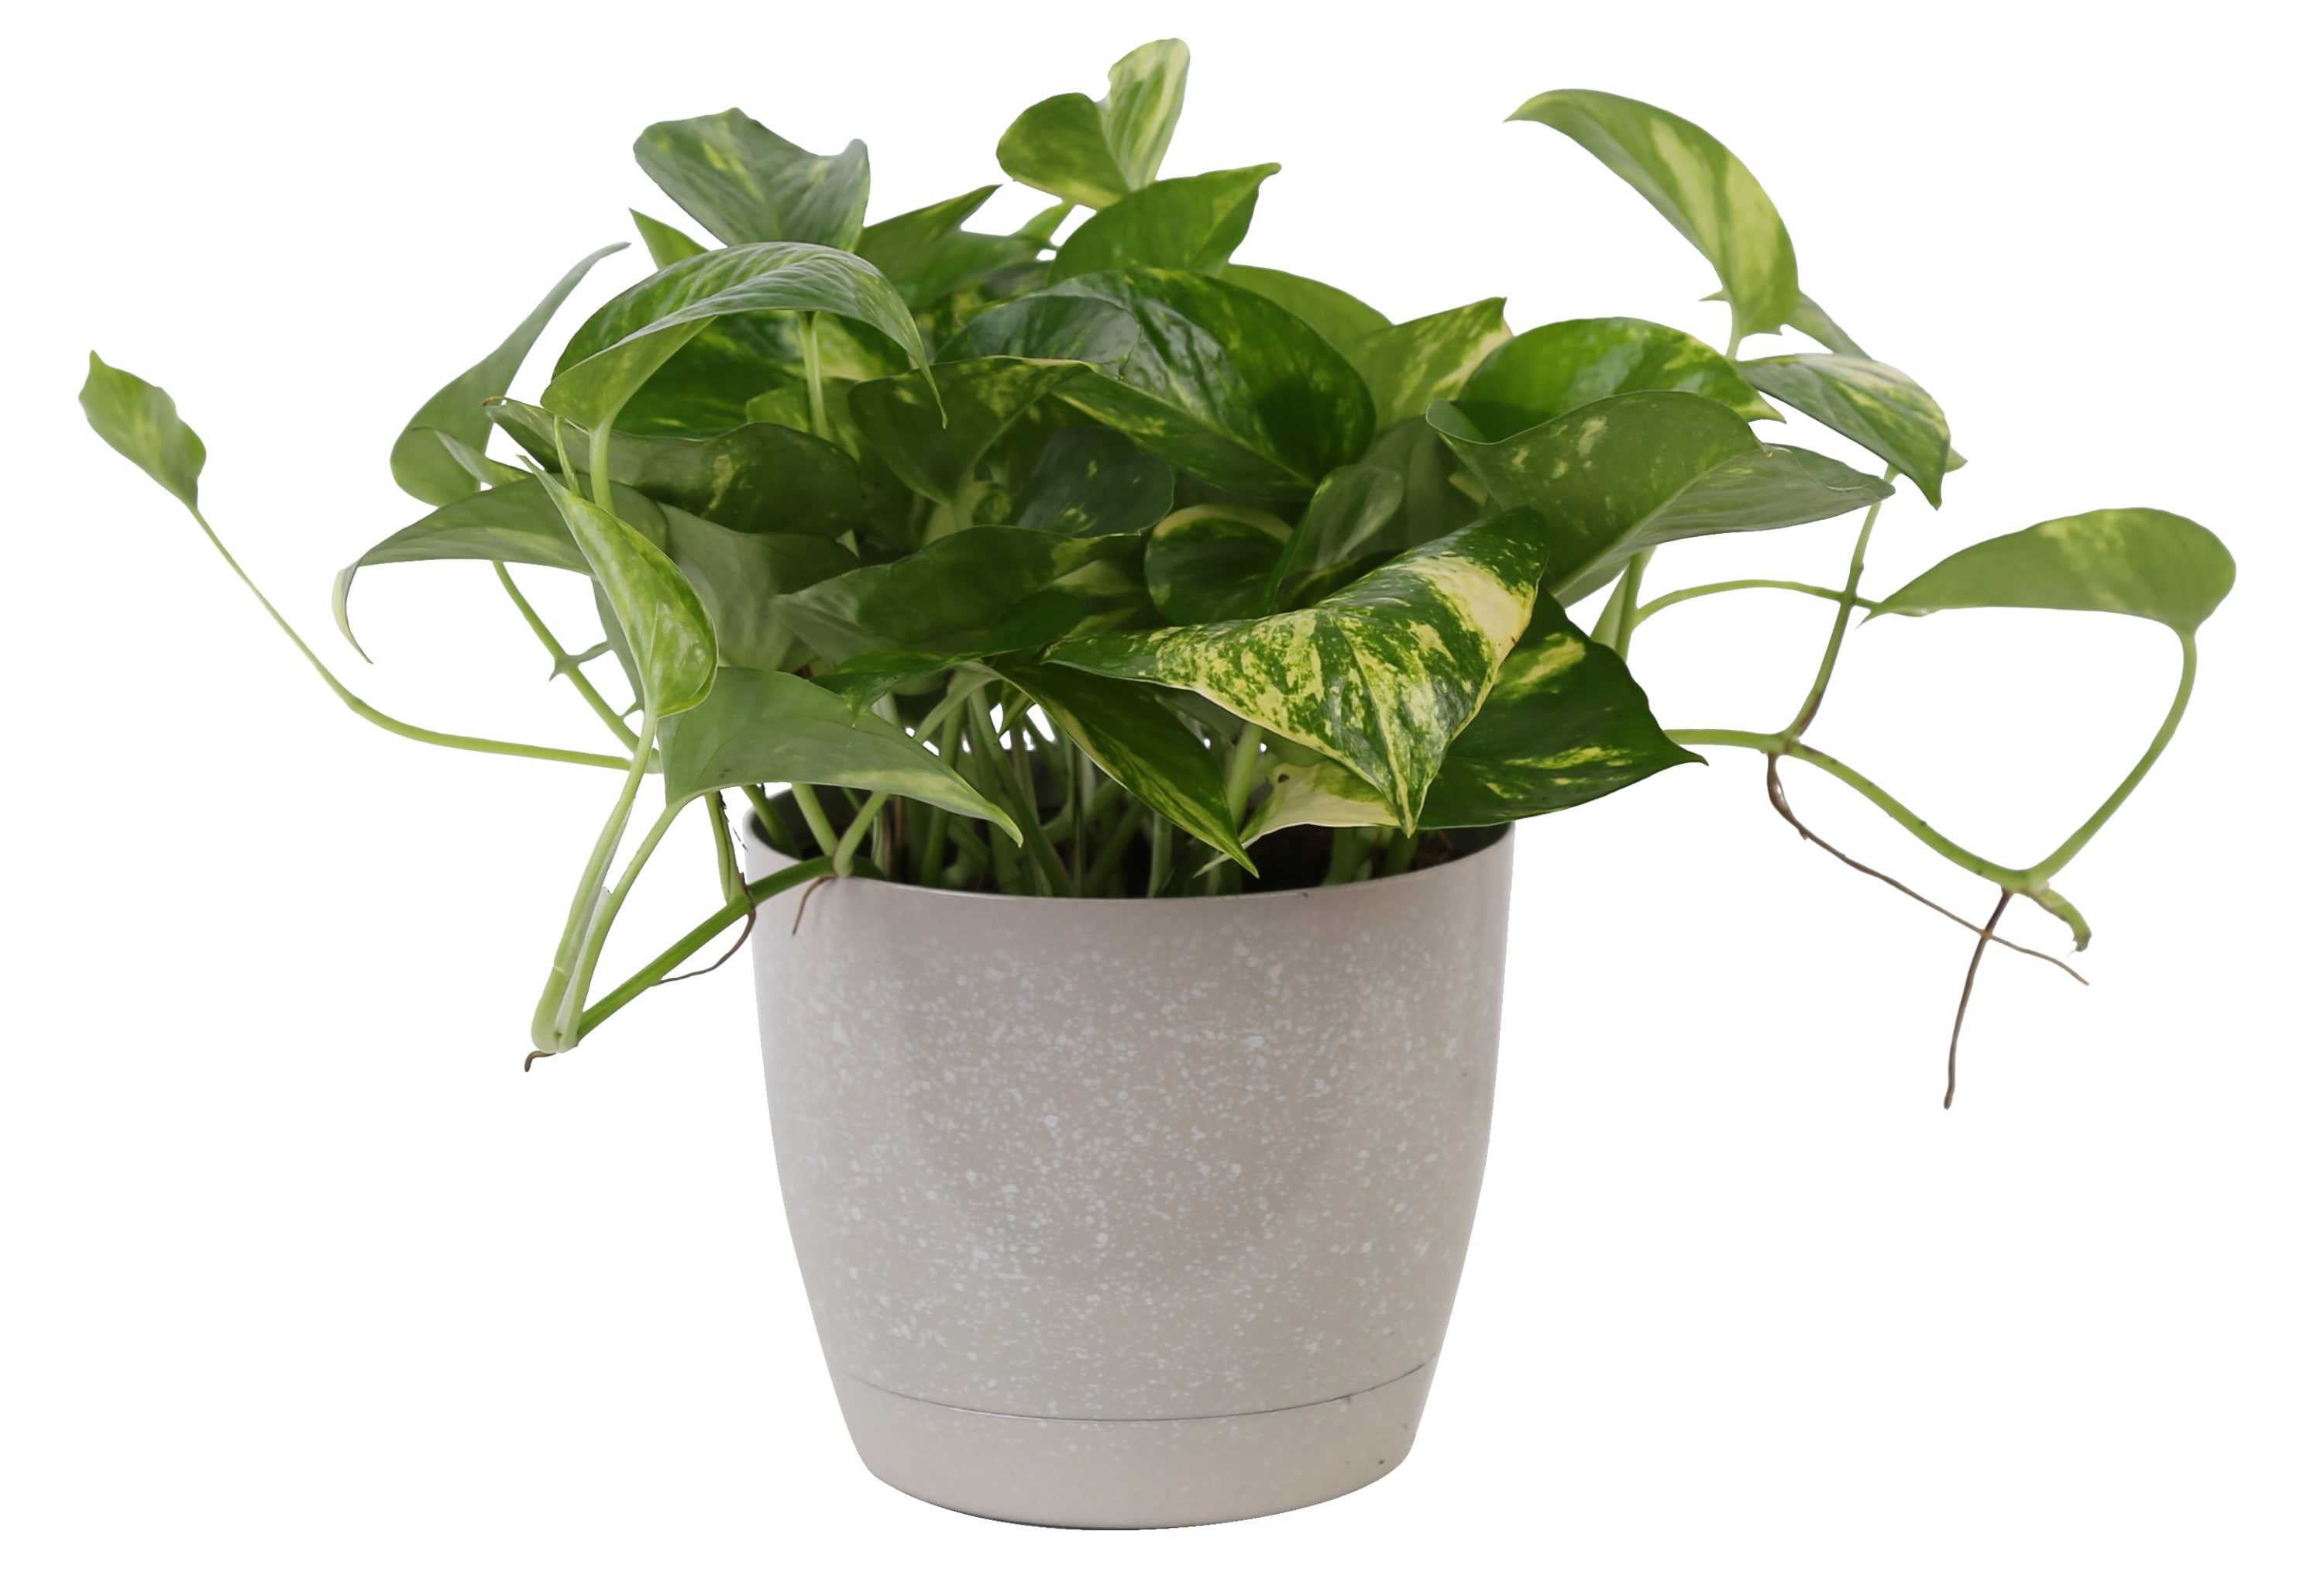 Costa Farms Devil's Ivy Pothos House Plant in 6-in Pot | CO.GP6.1.WW.RED